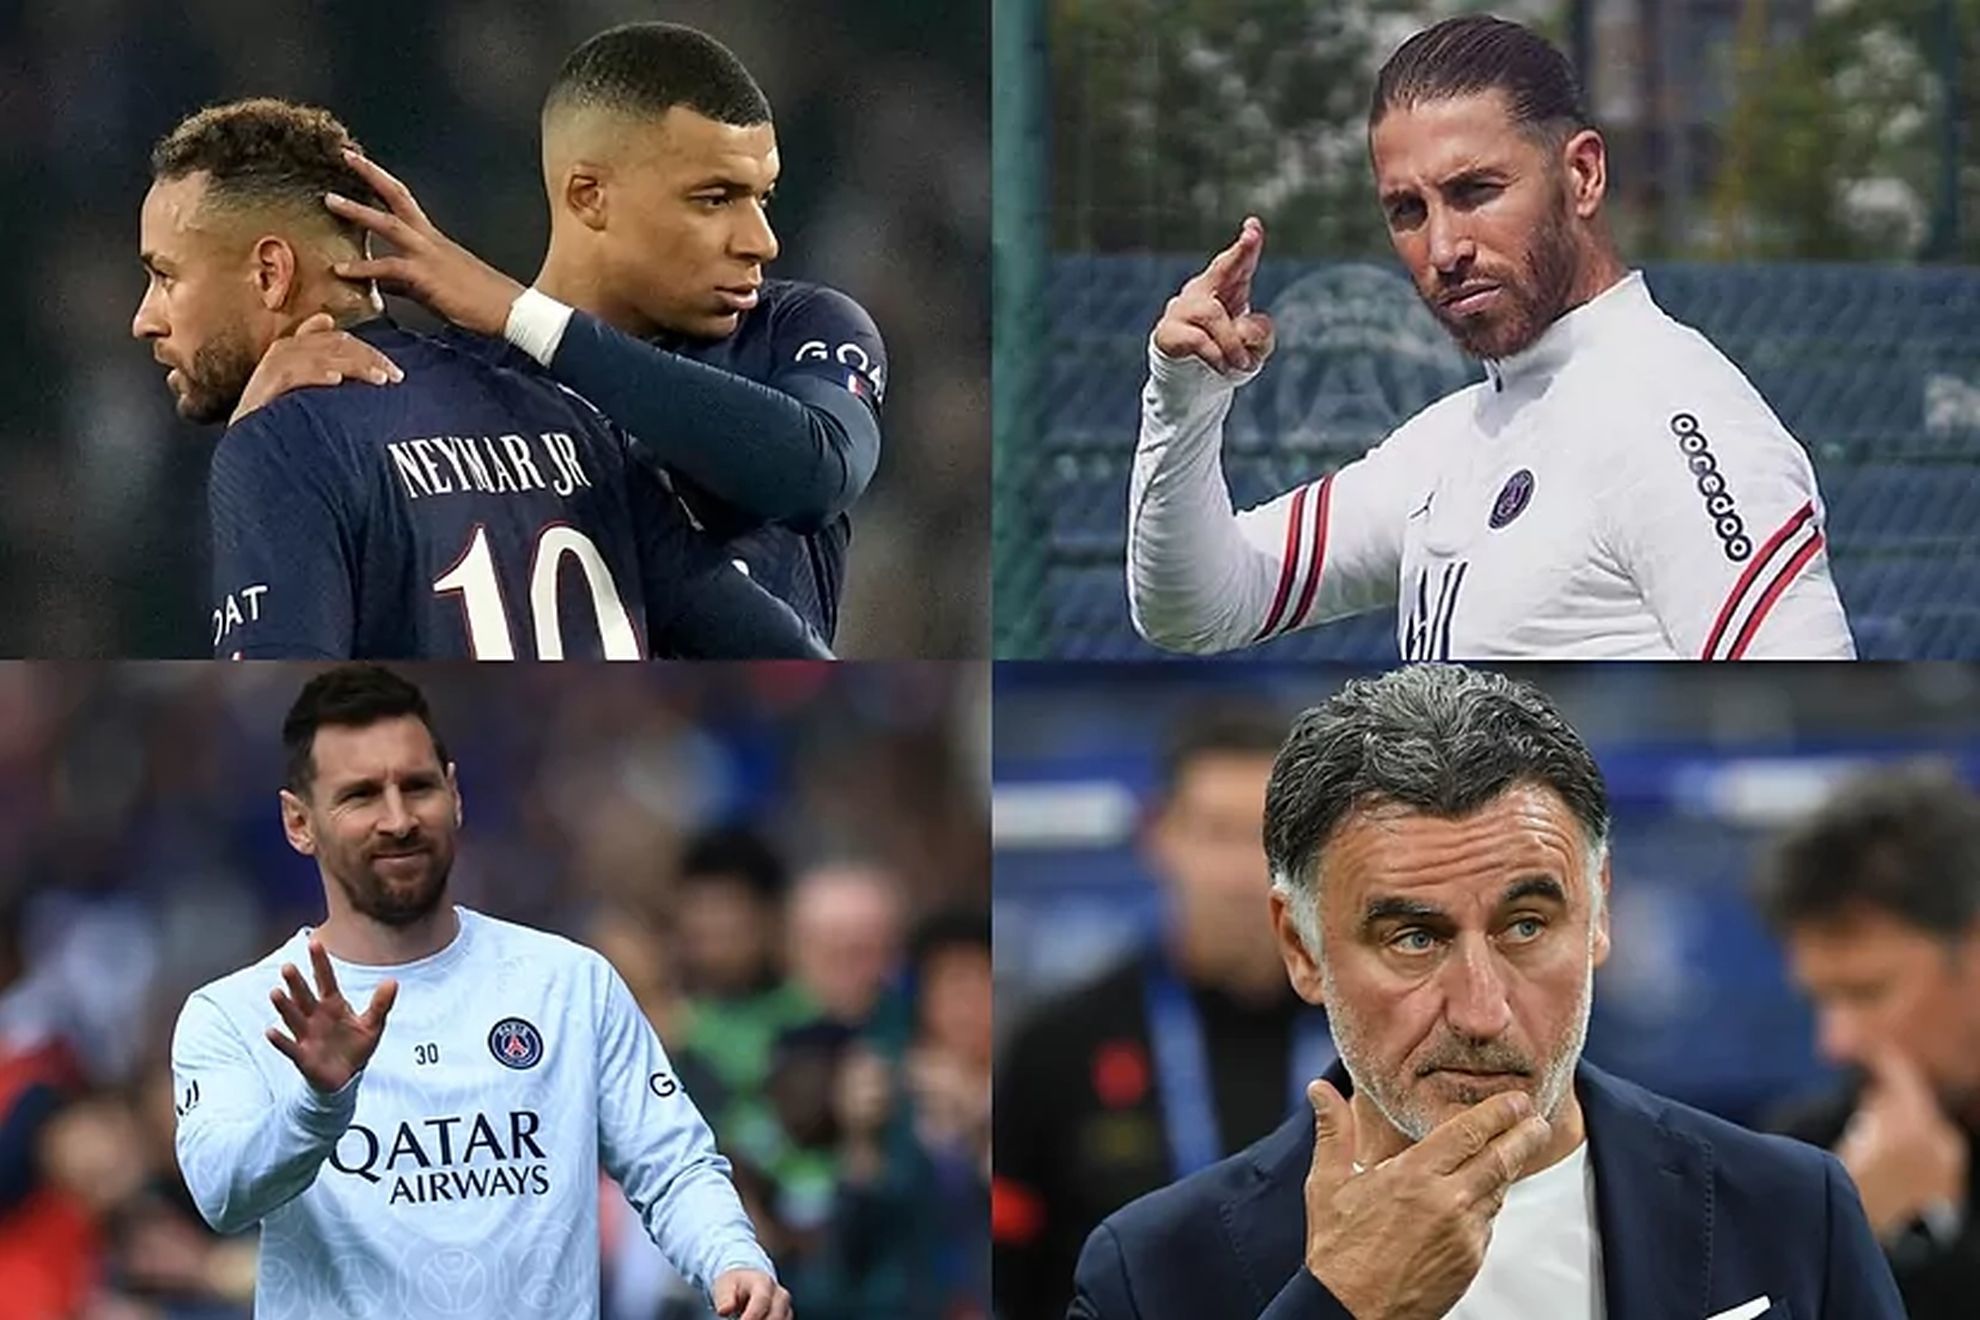 The big changes coming at PSG: Messi, Neymar, Mbappe, Ramos, Galtier...